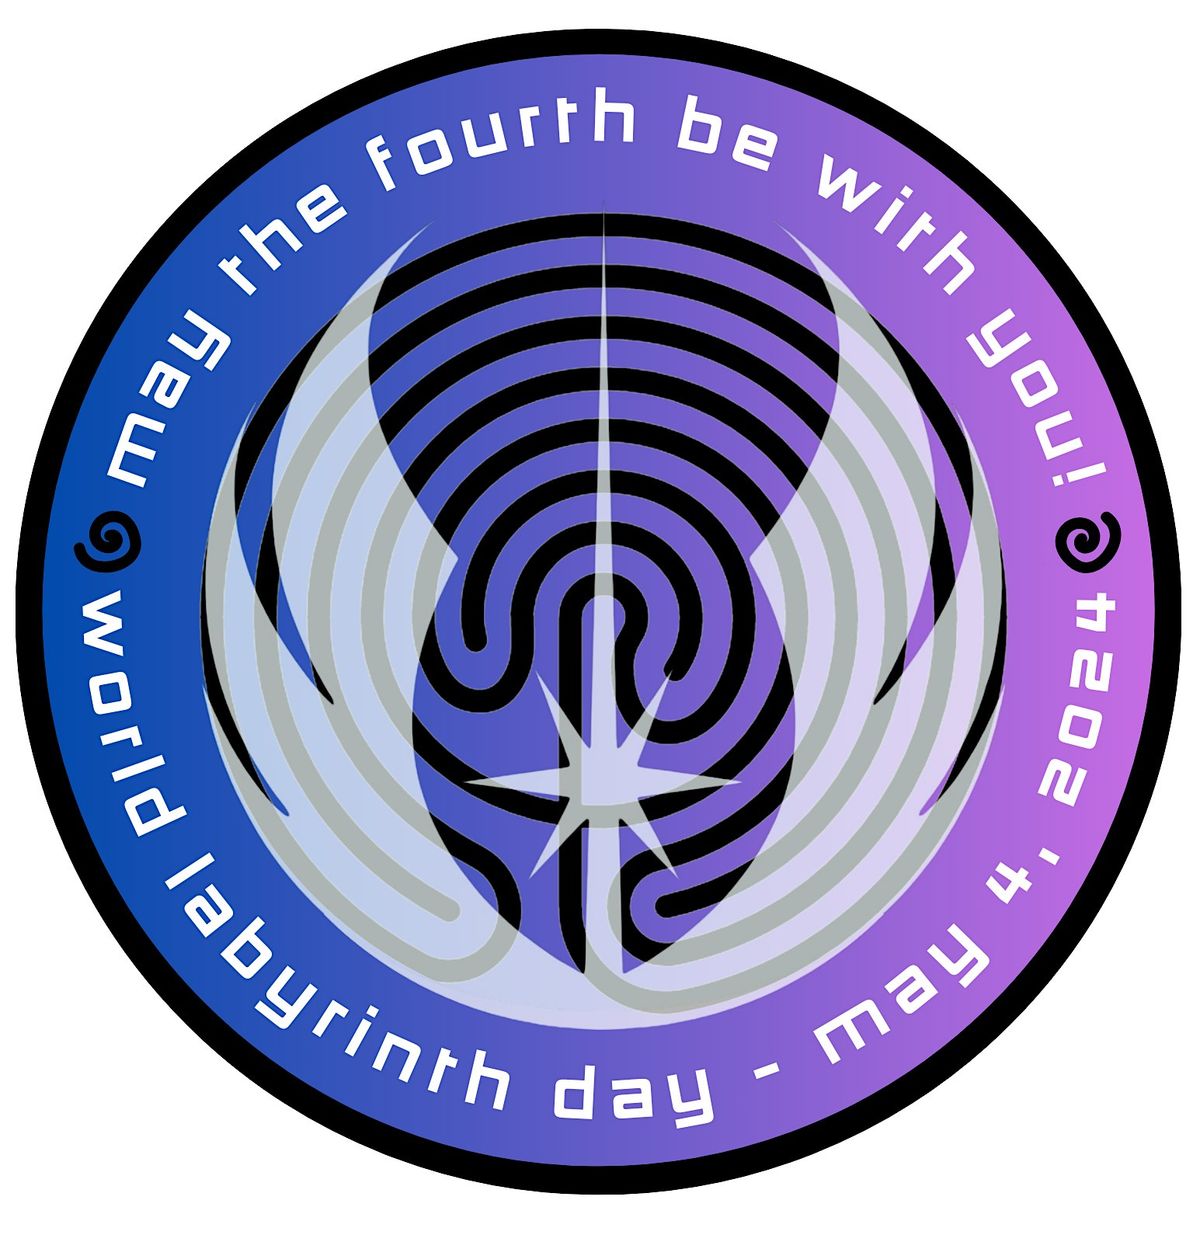 Celebrate World Labyrinth Day and Star Wars Day